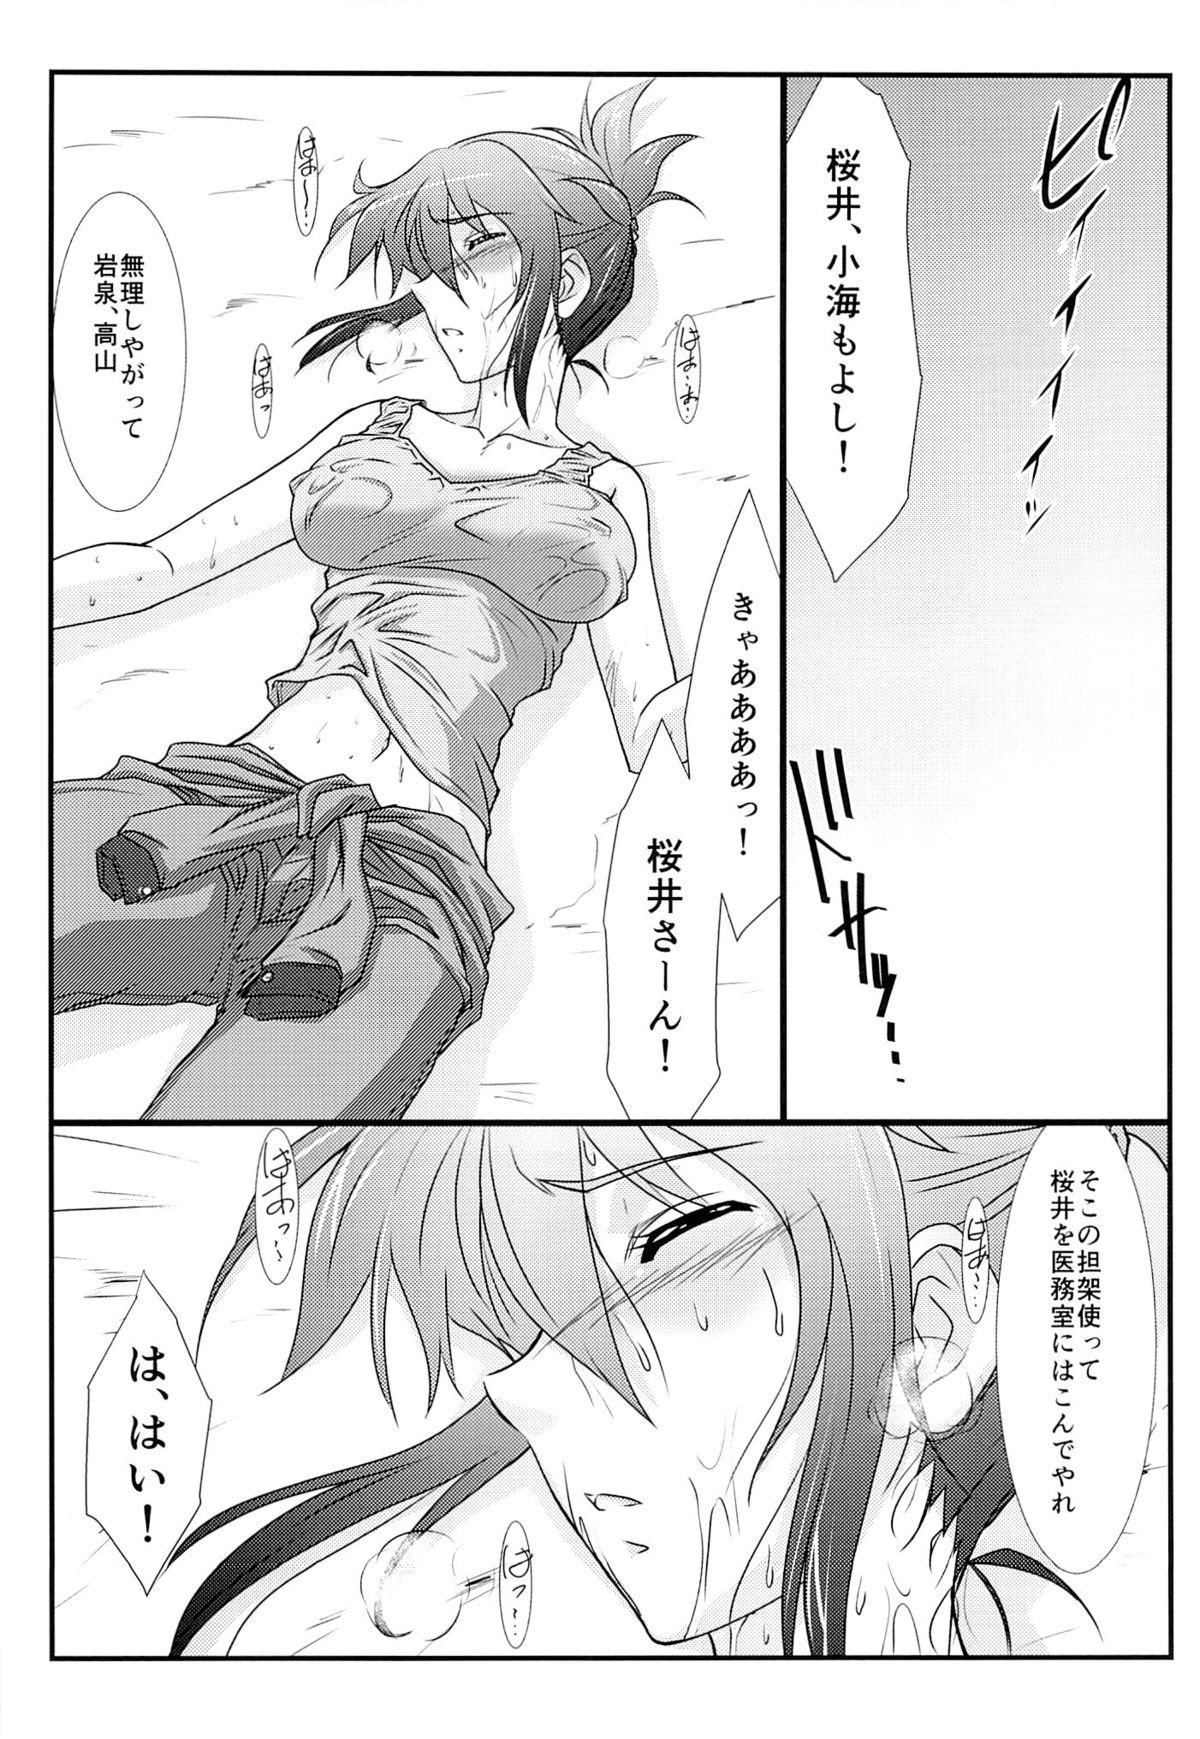 Culo Astral Bout Ver.28 - Rail wars Sex Toy - Page 4